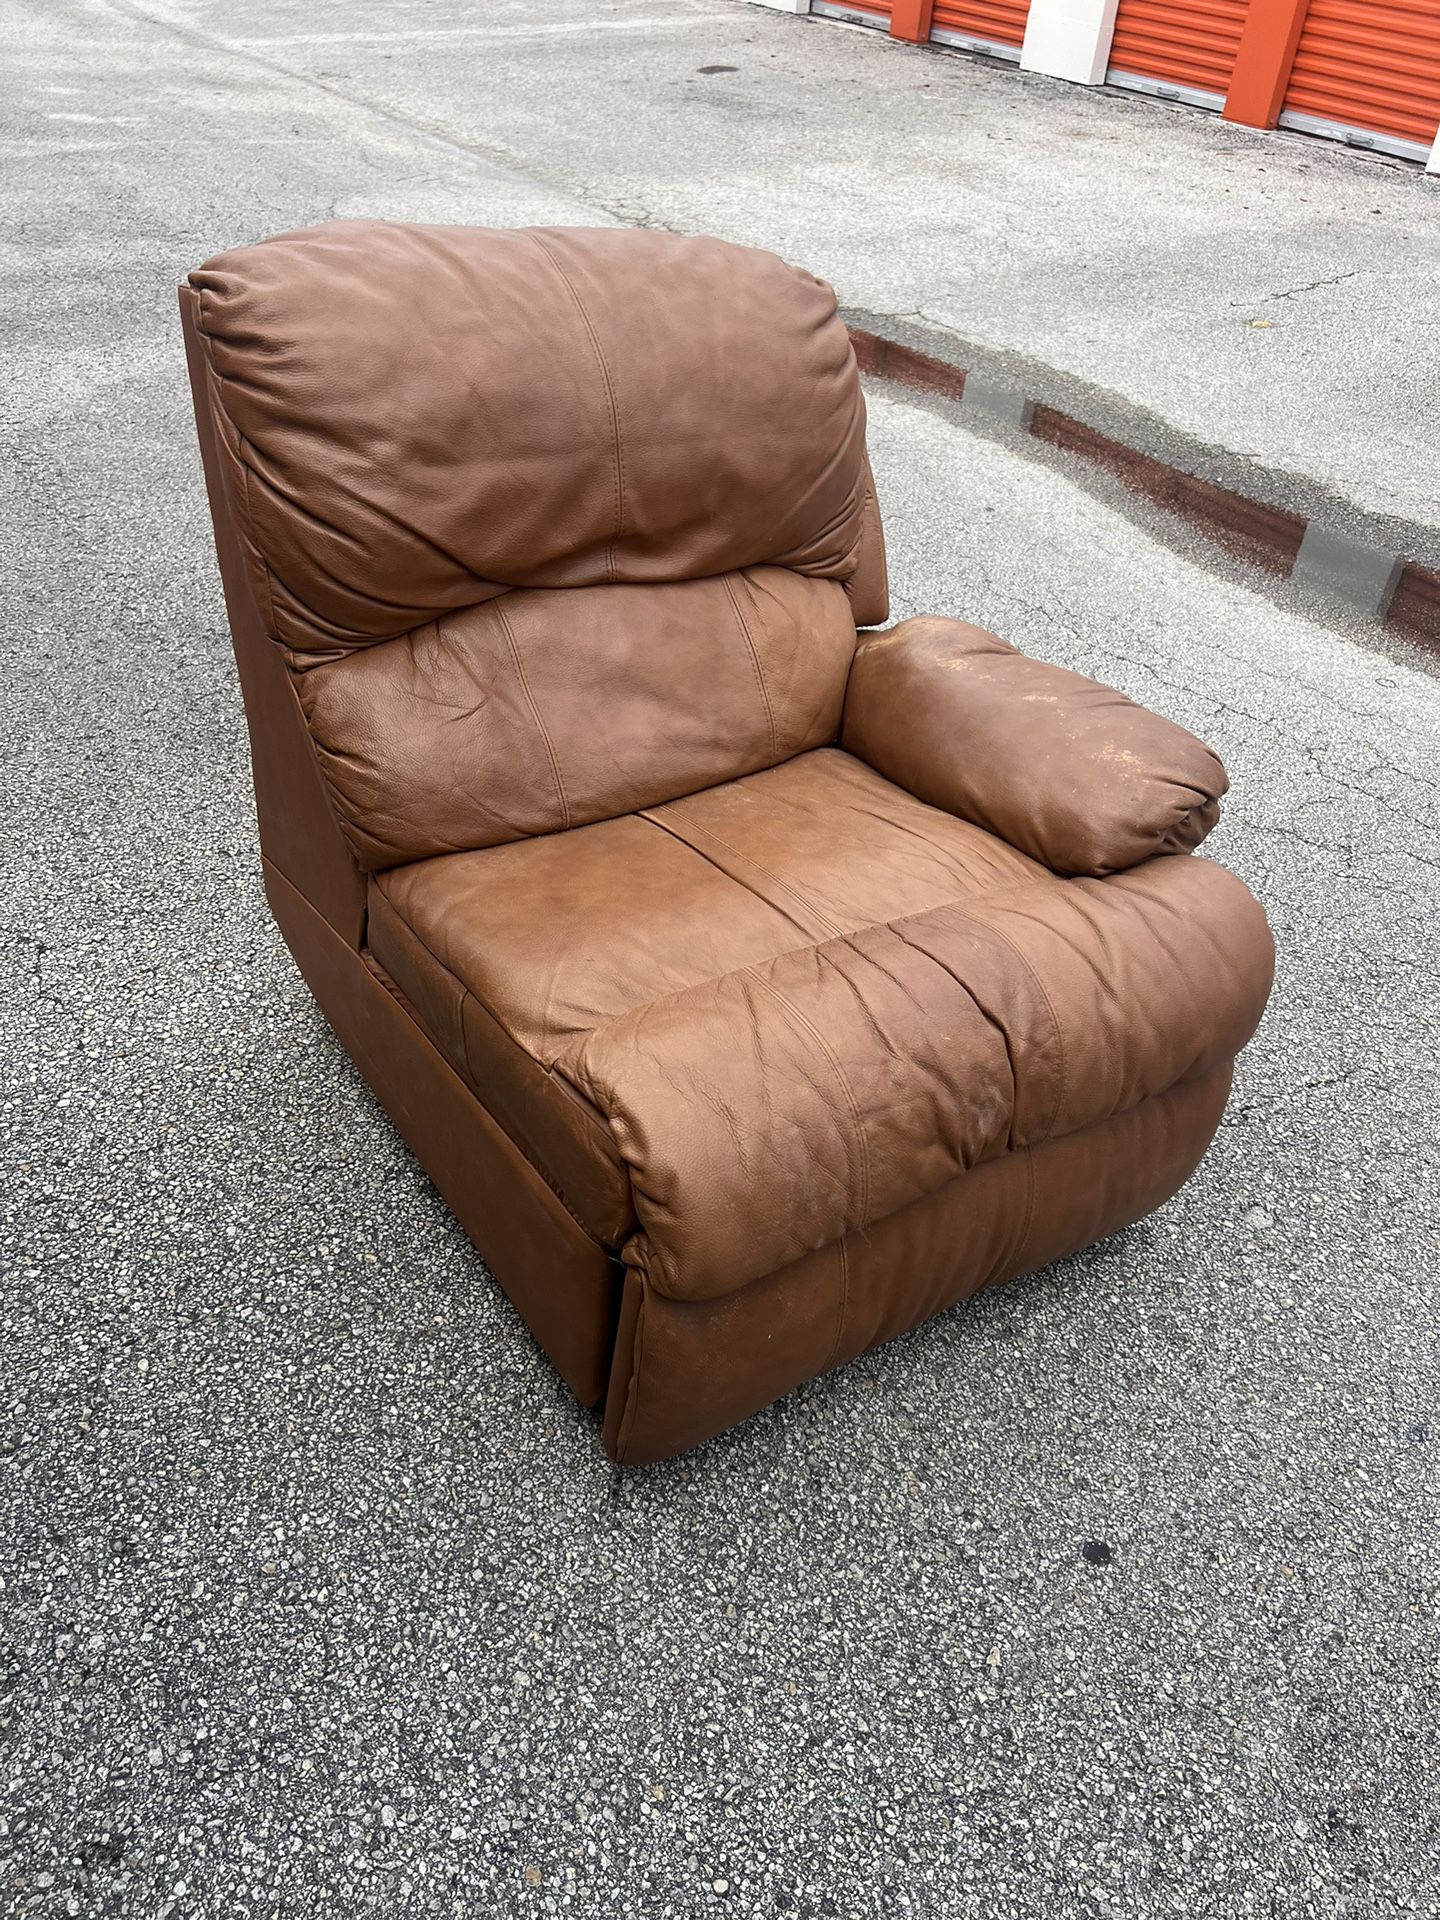 Sectional $150 Recliner $50